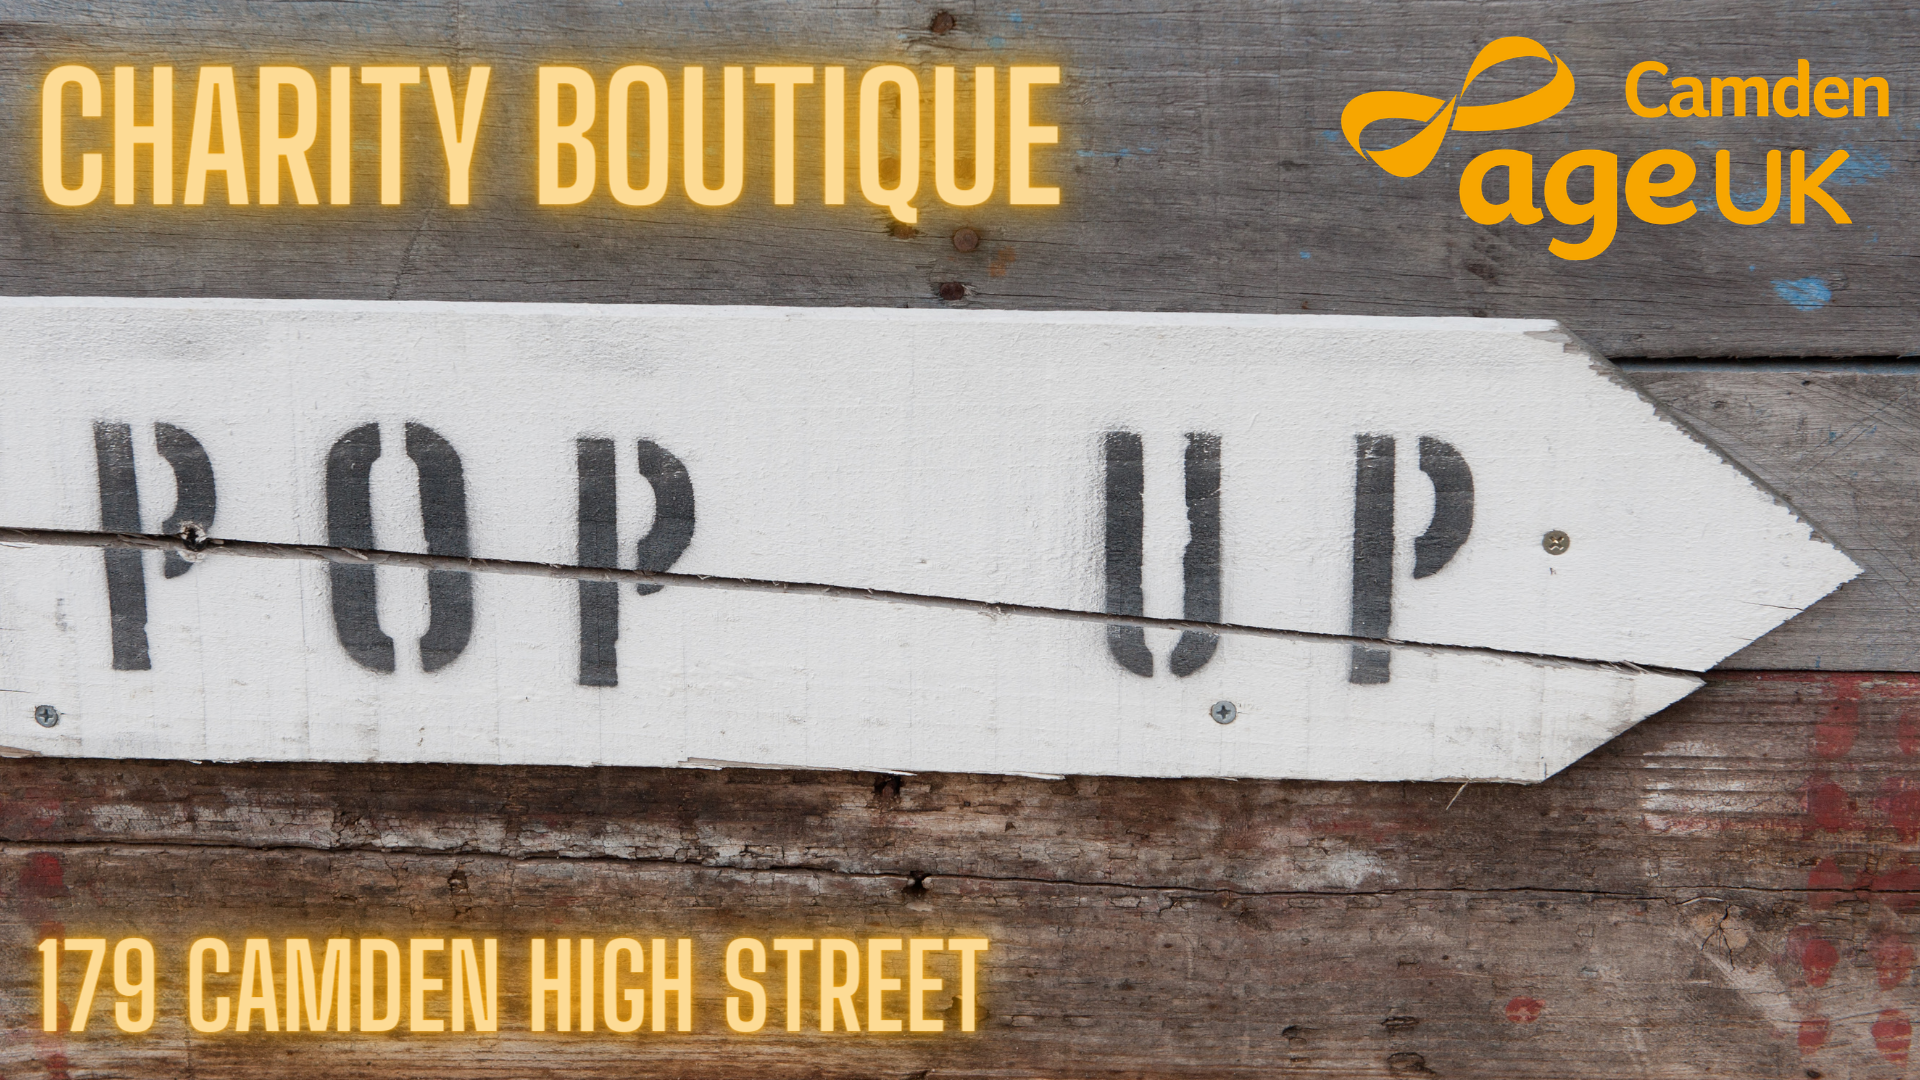 pop up charity boutique sign